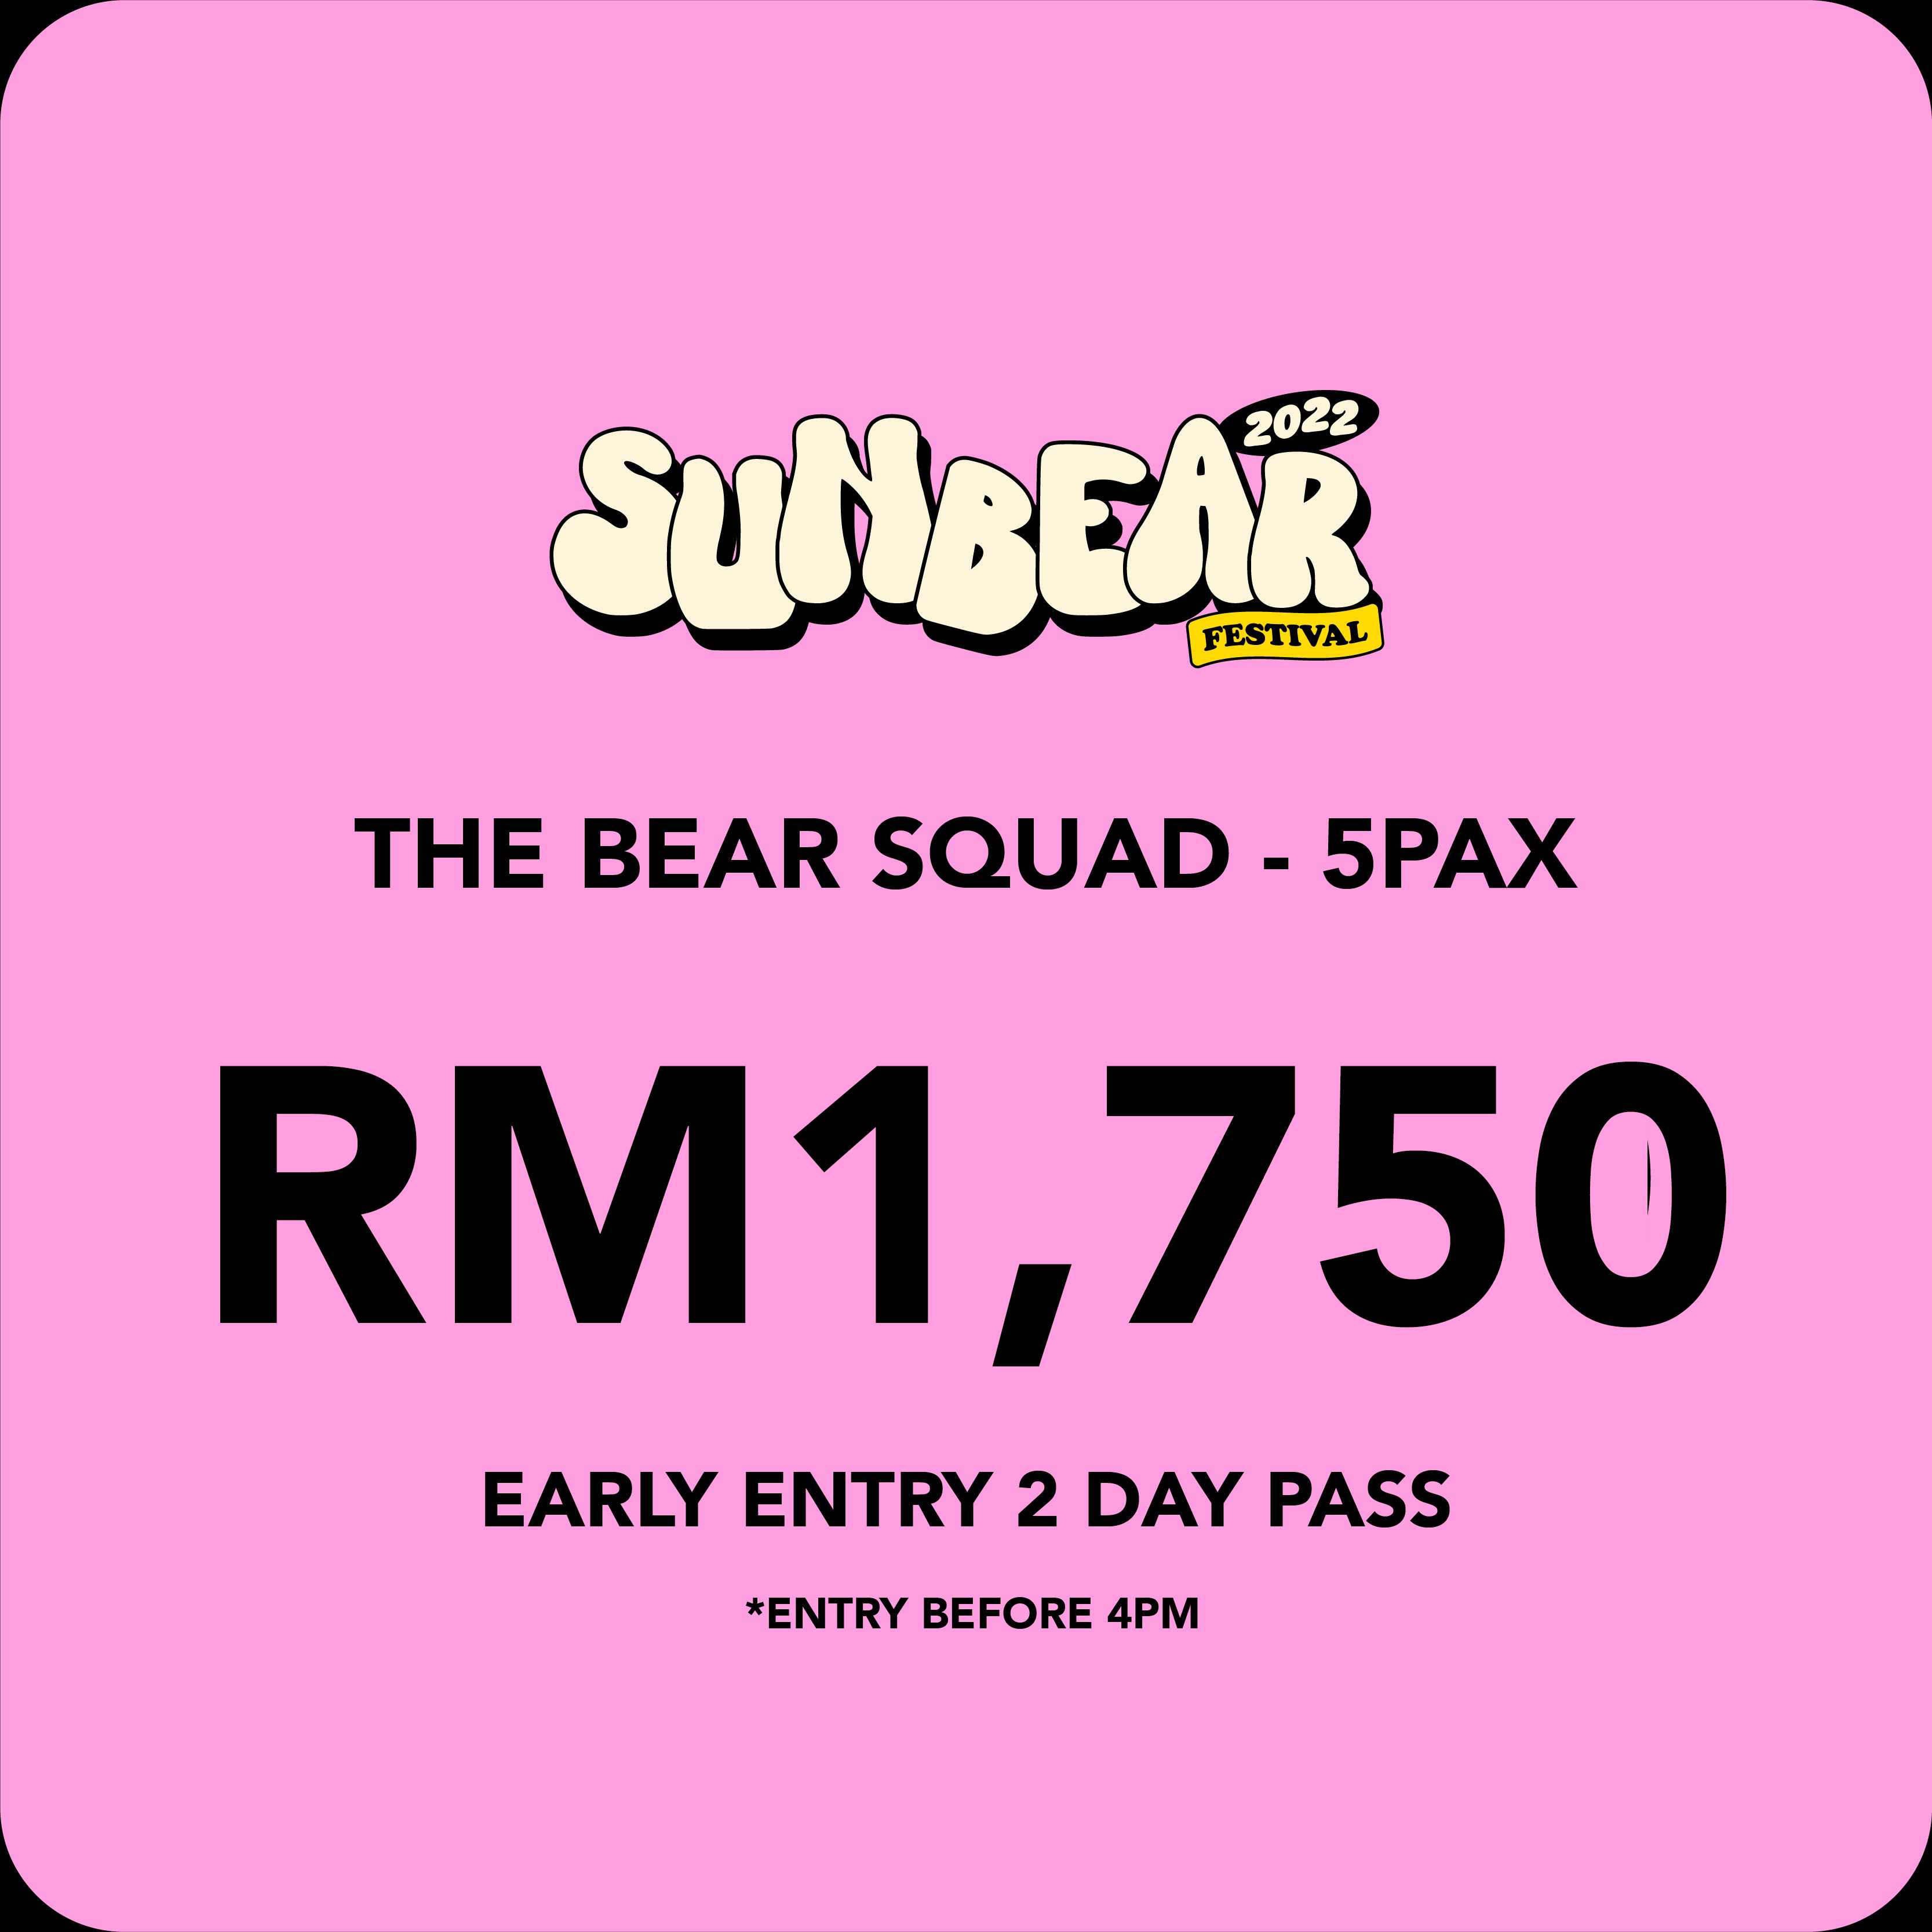 THE BEAR SQUAD EARLY ENTRY 2 DAY PASS - 5 PAX